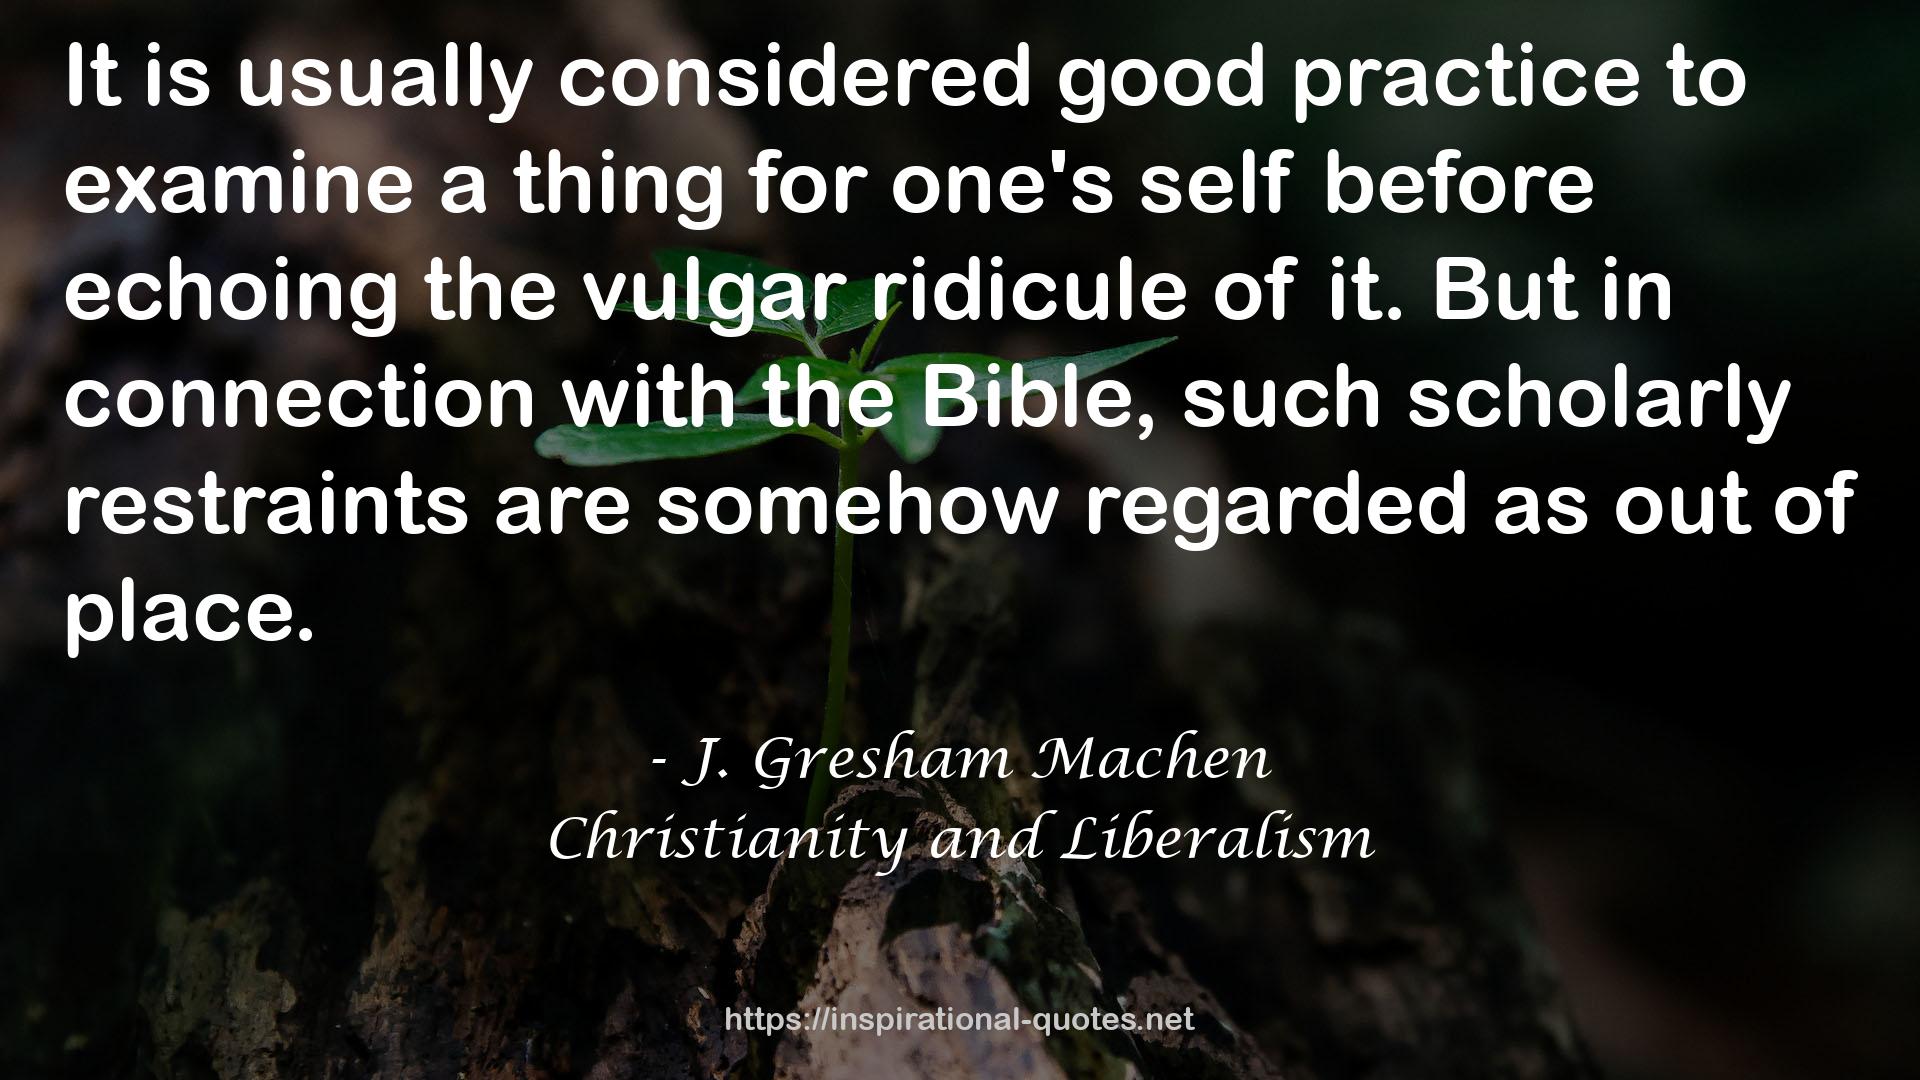 Christianity and Liberalism QUOTES